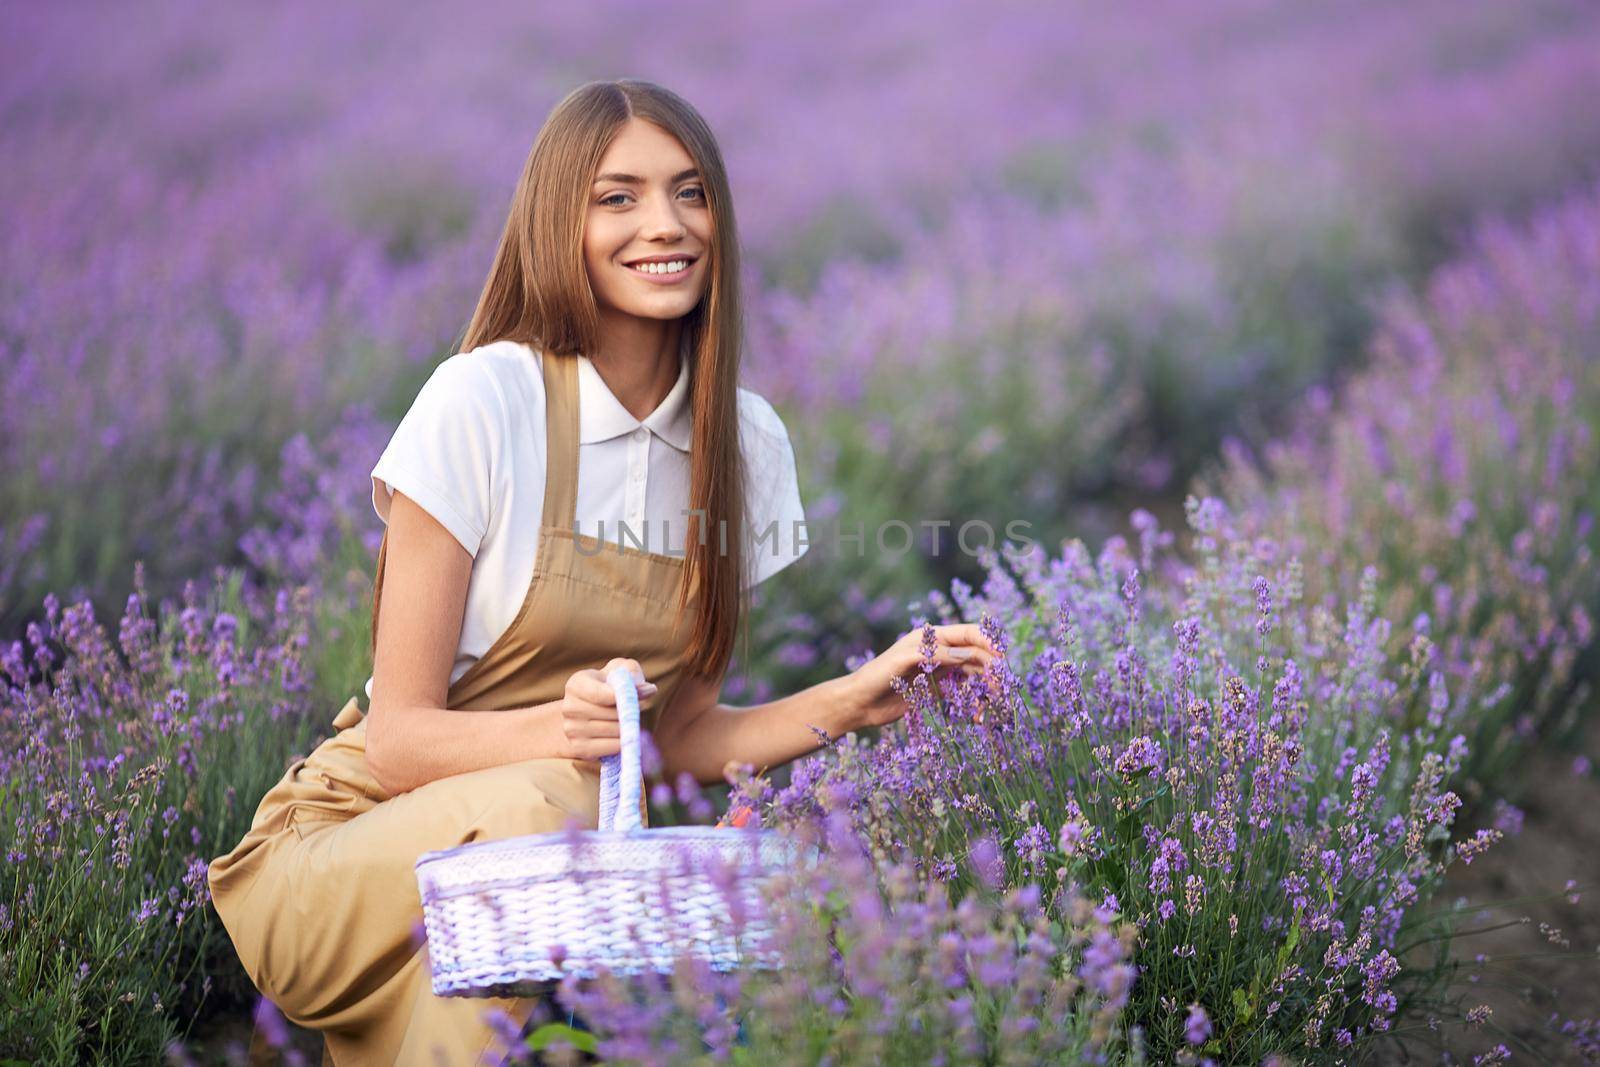 Smiling woman holding basket in lavender field. by SerhiiBobyk